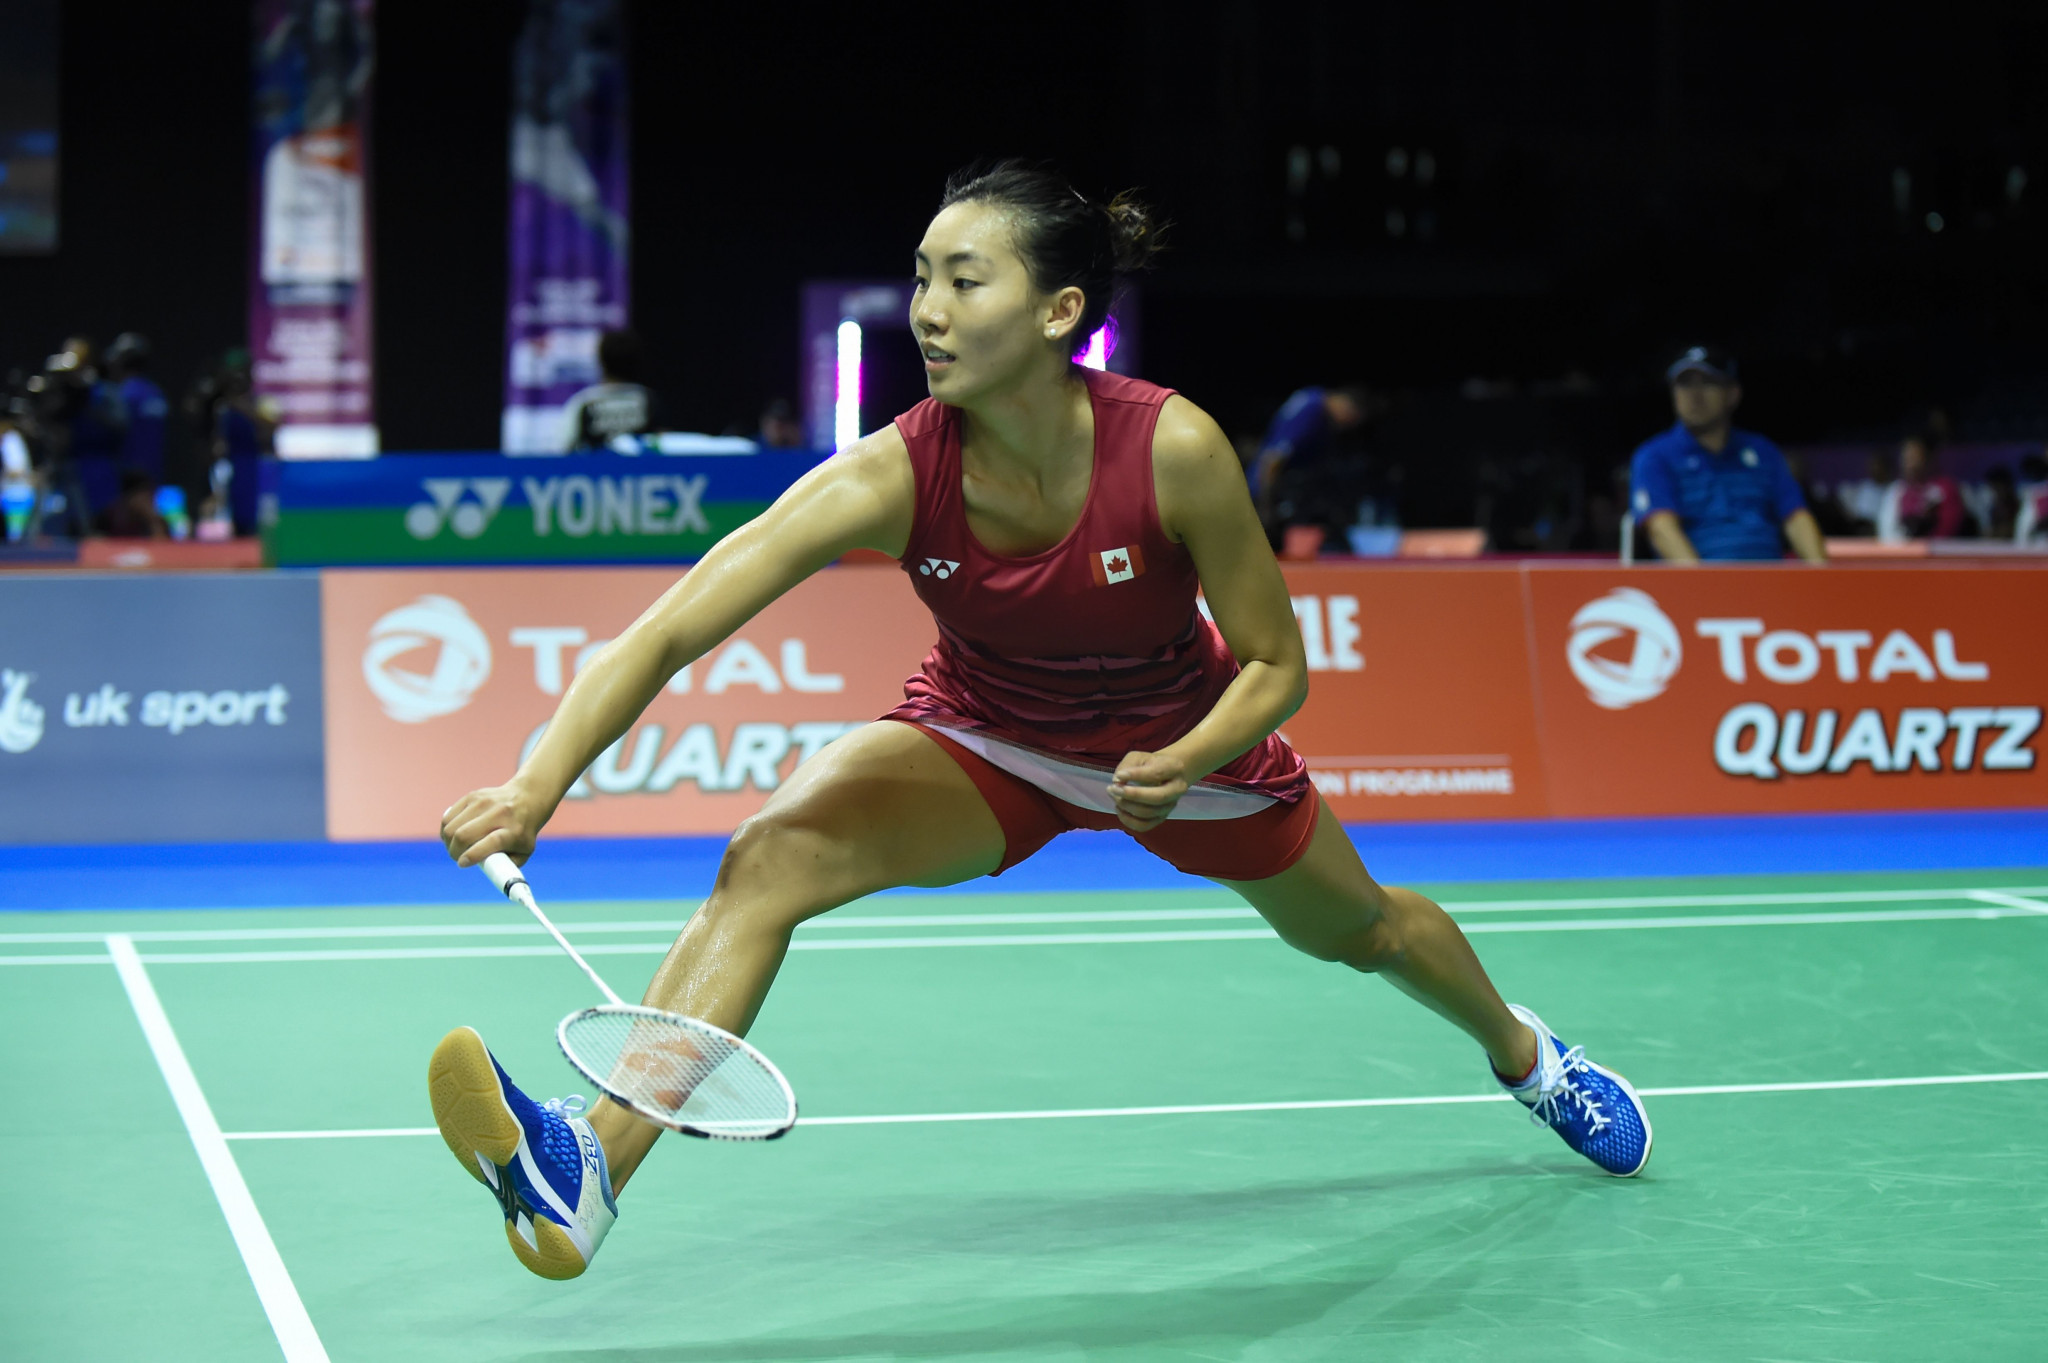 Multiple Pan American Games champion and Glasgow 2014 Commonwealth Games gold medallist Michelle Li of Canada is also in the women's singles field ©Getty Images